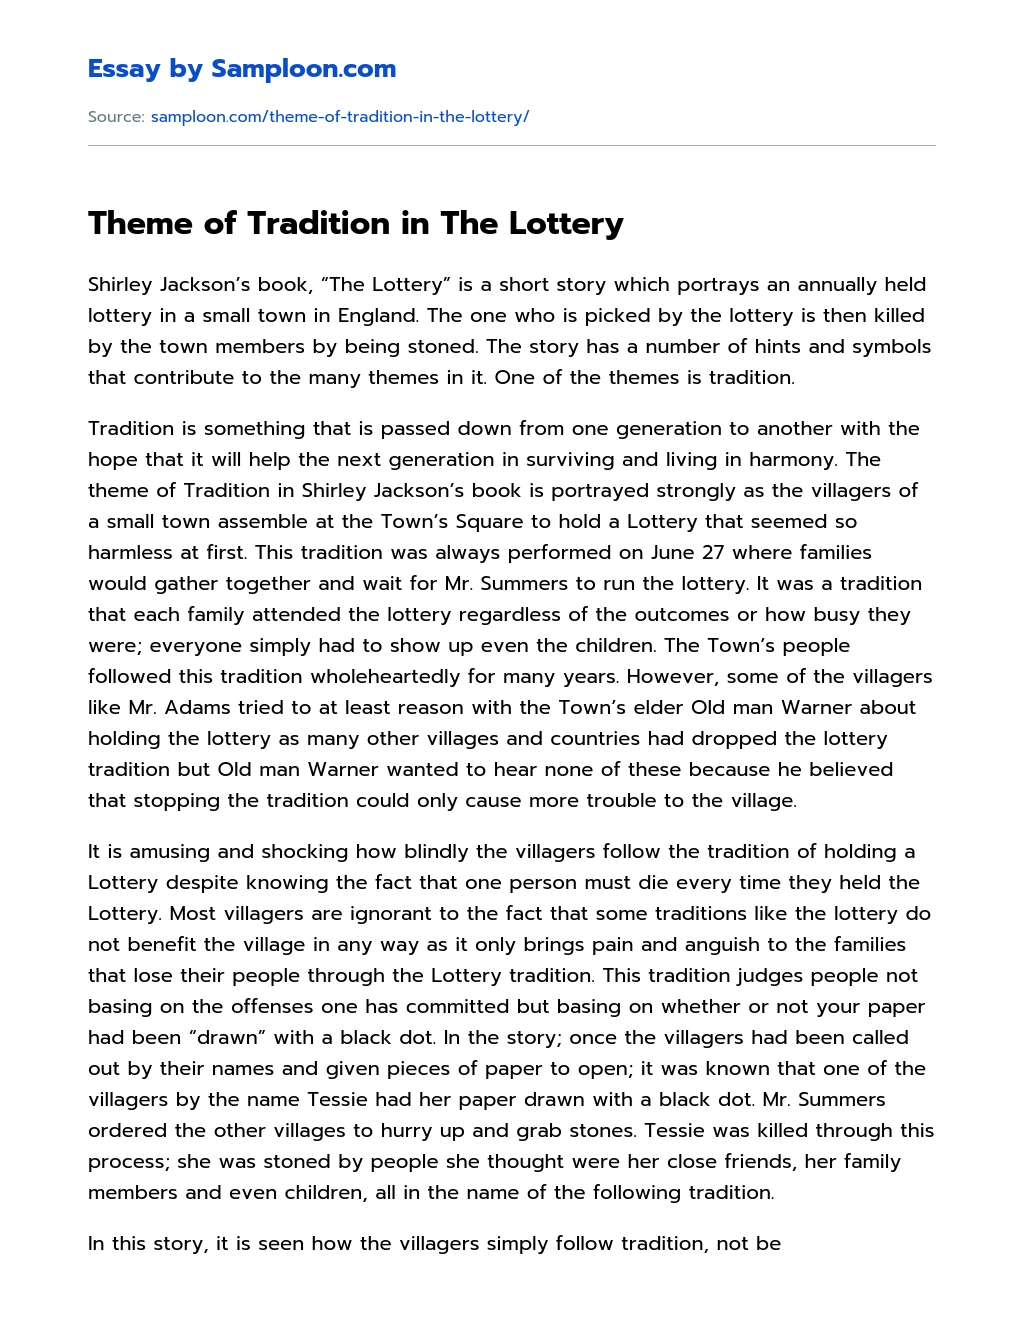 Theme of Tradition in The Lottery essay